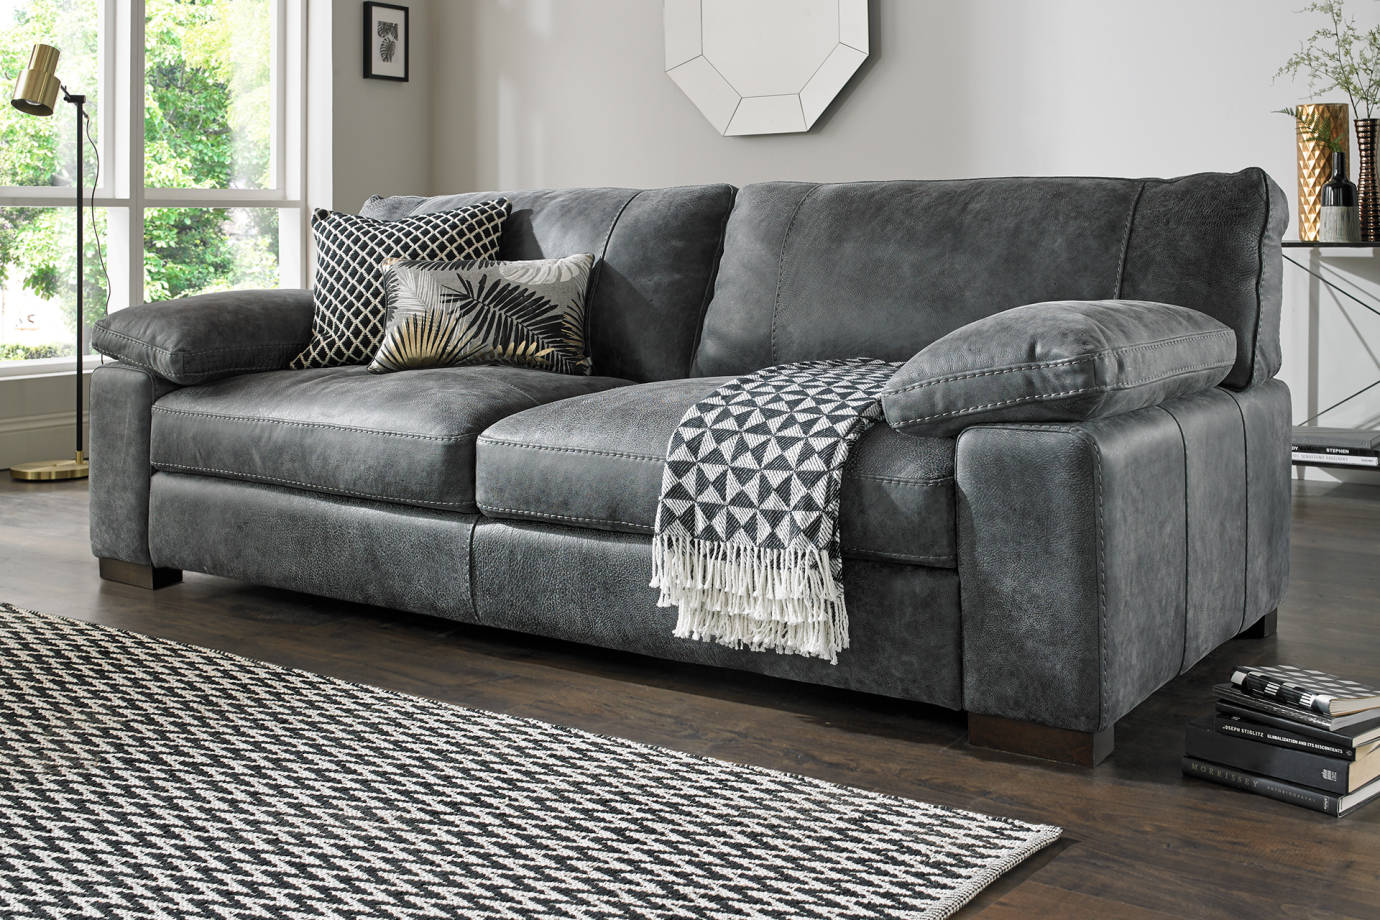 Leather Sofas Sofology, Leather And Suede Sofa